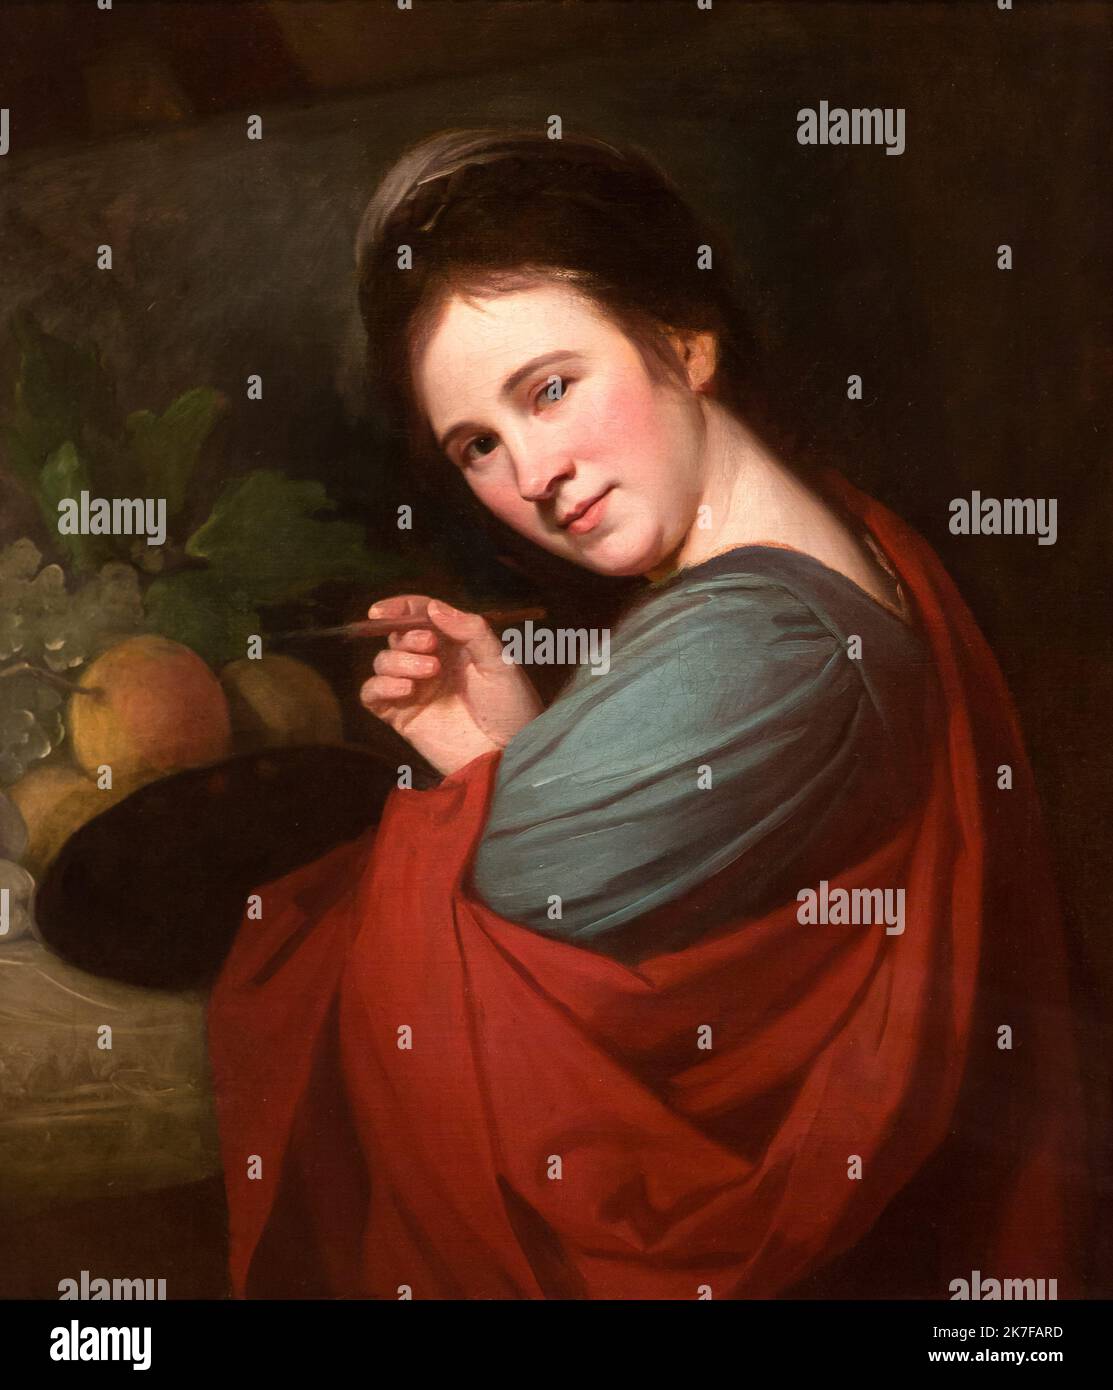 ©Active Museu/MAXPPP - ActiveMuseum 0003762.jpg / Mary Moser 1770 - / George Romney / Peinture Active Museum / Le Pictorium 1 person ,Apple ,Artist ,British ,Brunette ,Brush ,Chest ,Color's range ,Dark-eyed ,English ,Fruit ,Headgear ,Leaf (vegetable) ,Paint (to) ,Painter ,Painting (Activity) ,Portrait ,Profile ,Red ,Shawl ,Smile ,Smiling () ,Vertical ,Waist up ,White grape ,Woman ,Mary Moser ,18th century ,George Romney ,Painting ,  Stock Photo